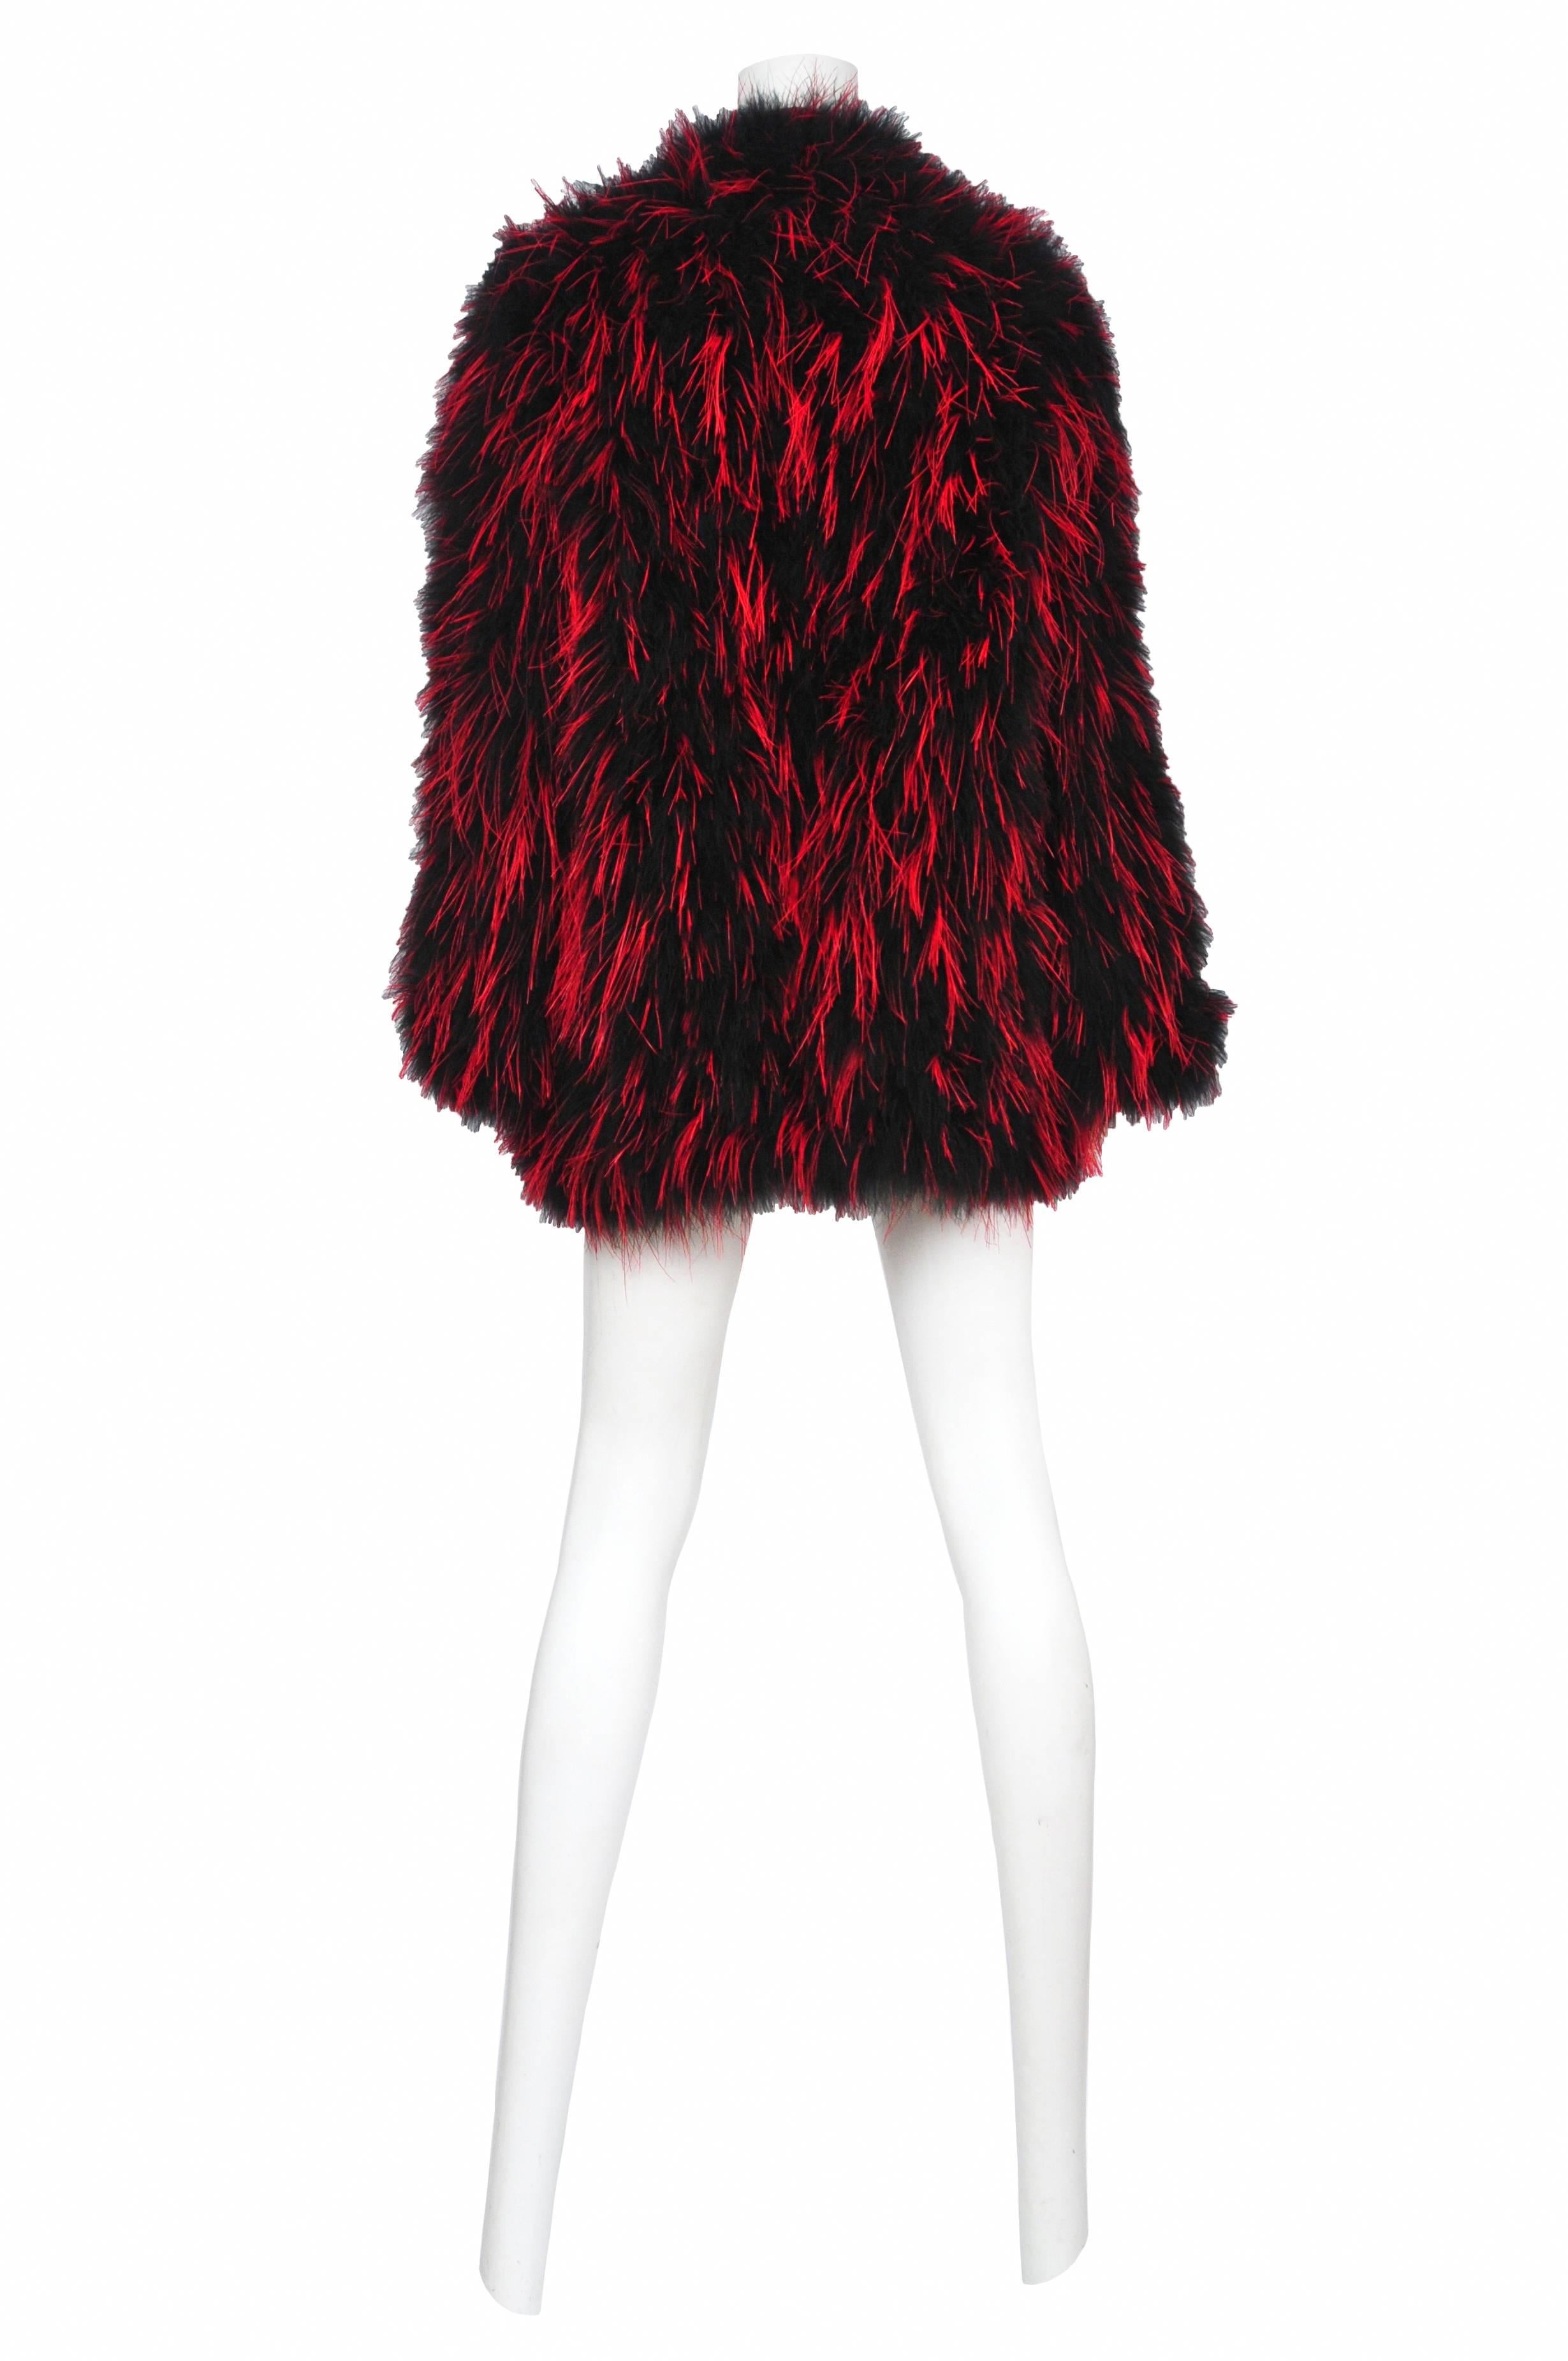 Vintage Yves Saint Laurent iconic chubby featuring black and red marabou feathers.